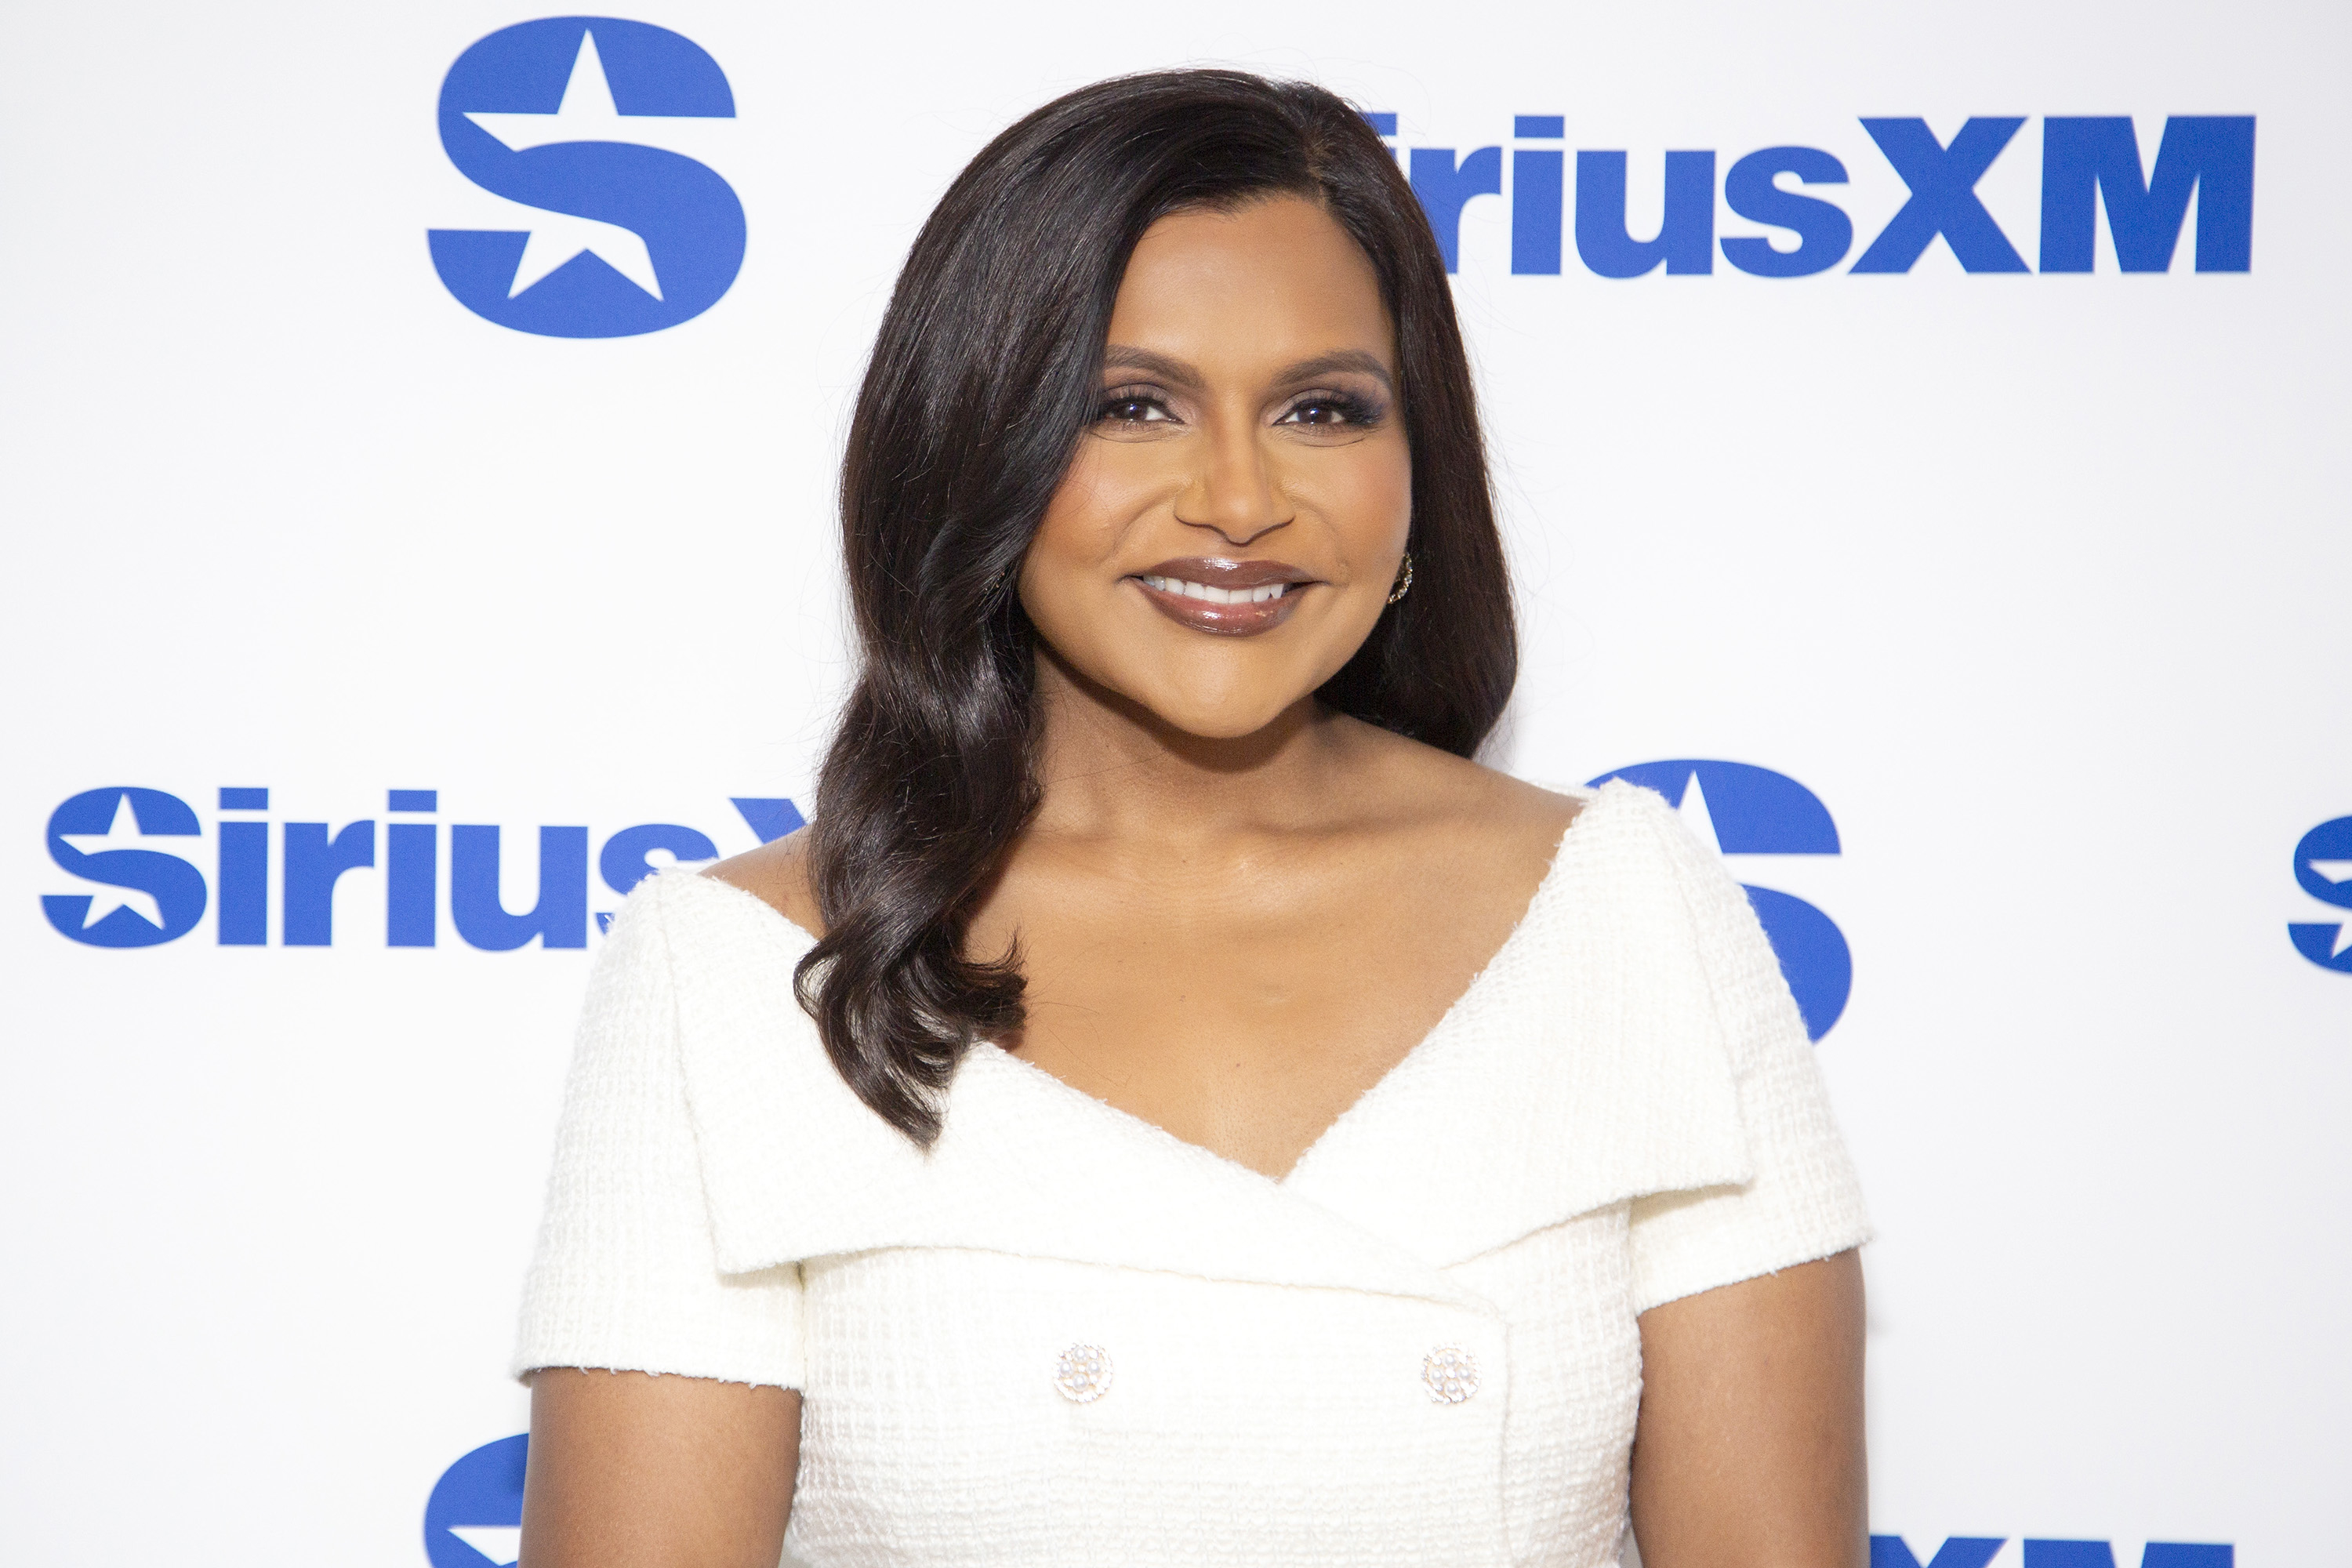 Mindy Kaling smiles at a SiriusXM event, wearing an elegant off-the-shoulder white dress